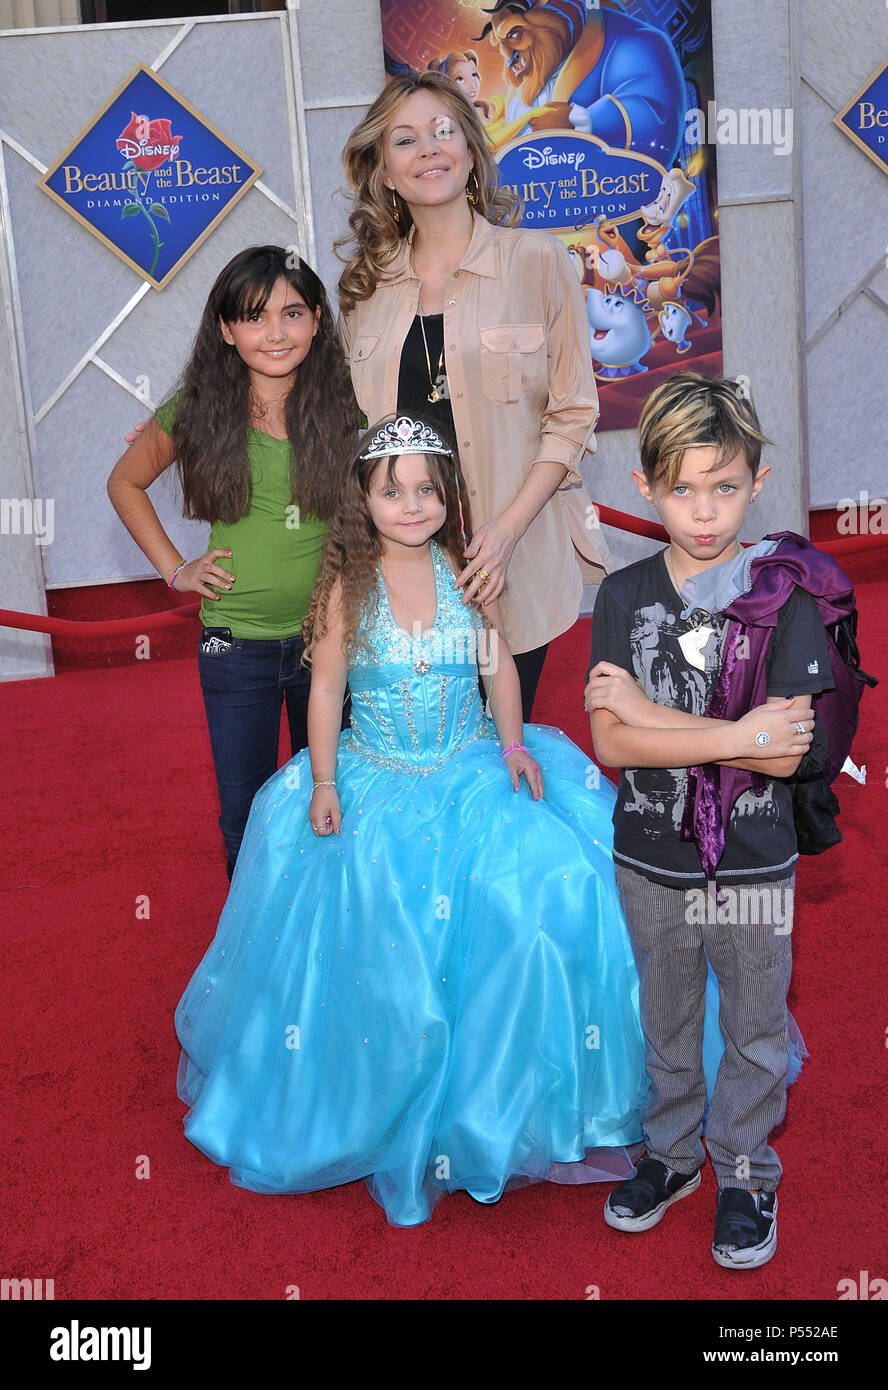 Shanna Moekler with dauhgters and son The Beauty and The Beast DVD / Blue Ray release at El Capitan Theatre In Los Angeles.Shanna Moakler kids 30  Event in Hollywood Life - California, Red Carpet Event, USA, Film Industry, Celebrities, Photography, Bestof, Arts Culture and Entertainment, Celebrities fashion, Best of, Hollywood Life, Event in Hollywood Life - California, Red Carpet and backstage, Music celebrities, Topix, Couple, family ( husband and wife ) and kids- Children, brothers and sisters inquiry tsuni@Gamma-USA.com, Credit Tsuni / USA, 2010 Stock Photo